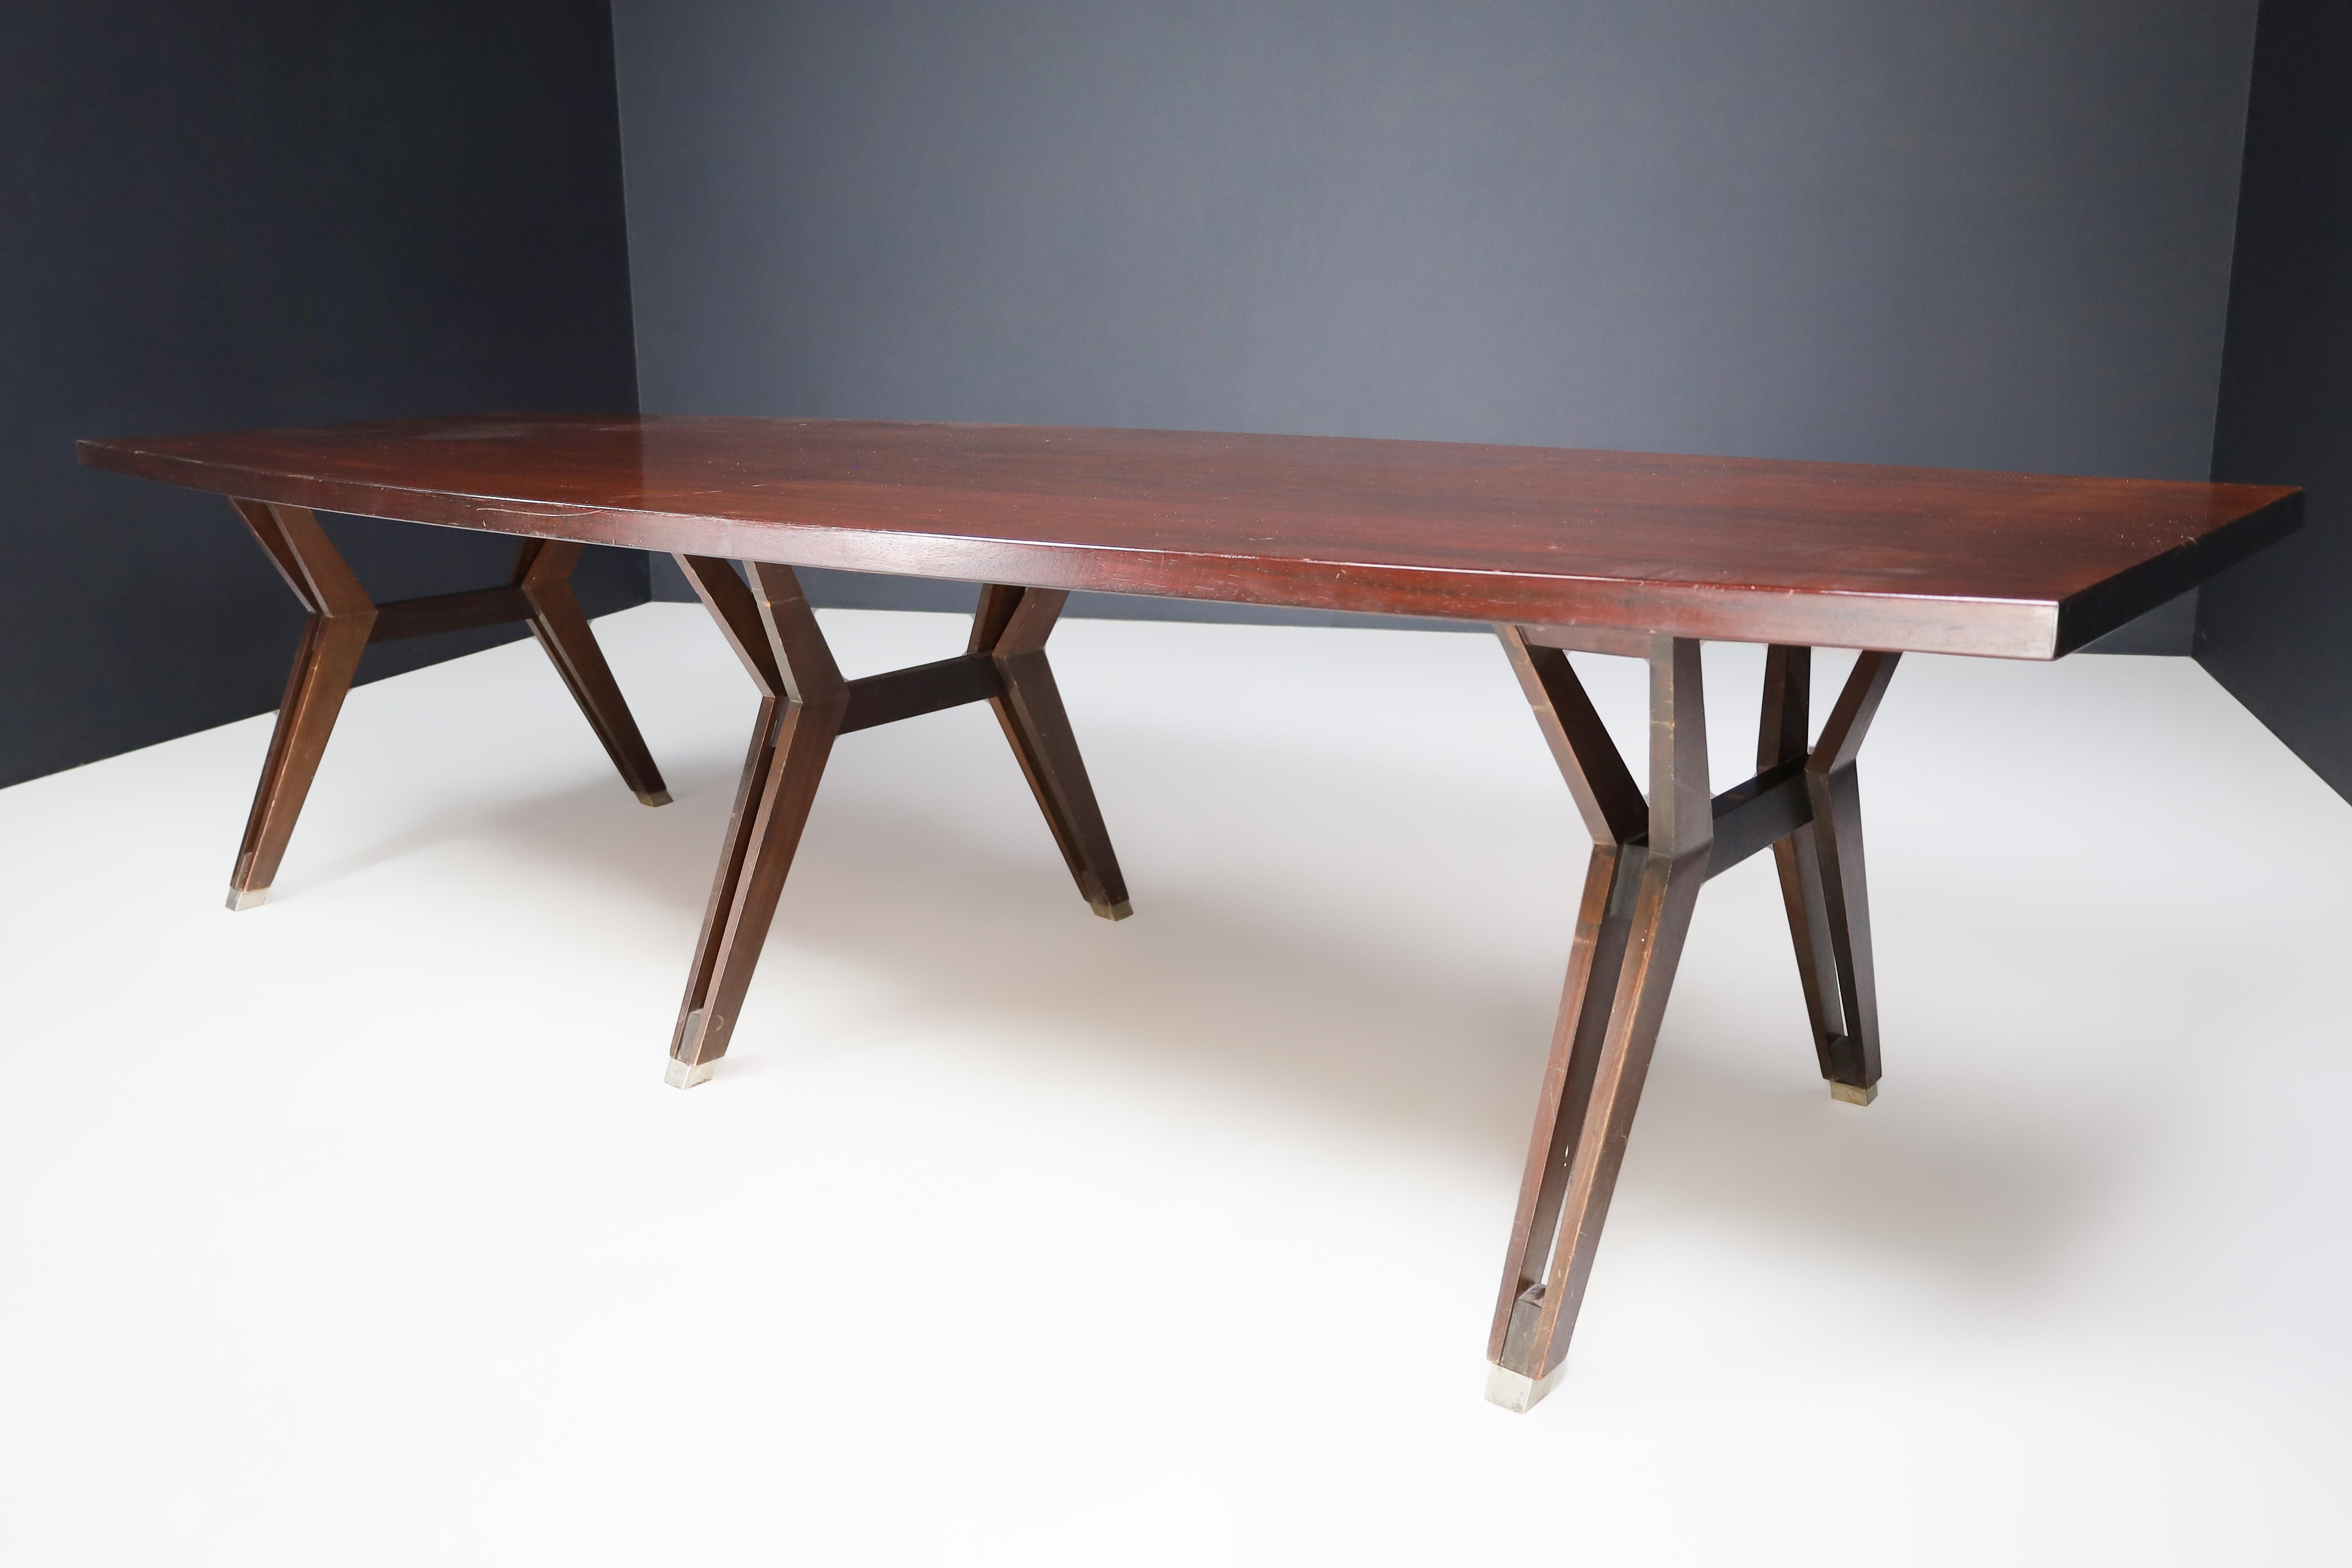 Ico Parisi for MIM Roma XL Large Dining Room Table, Italy 1950.

This is a large dining room table designed by Ico Parisi for MIM Roma, Italy in the 1950s. The table is made of dark polished wood with steel details and has a modernist design.